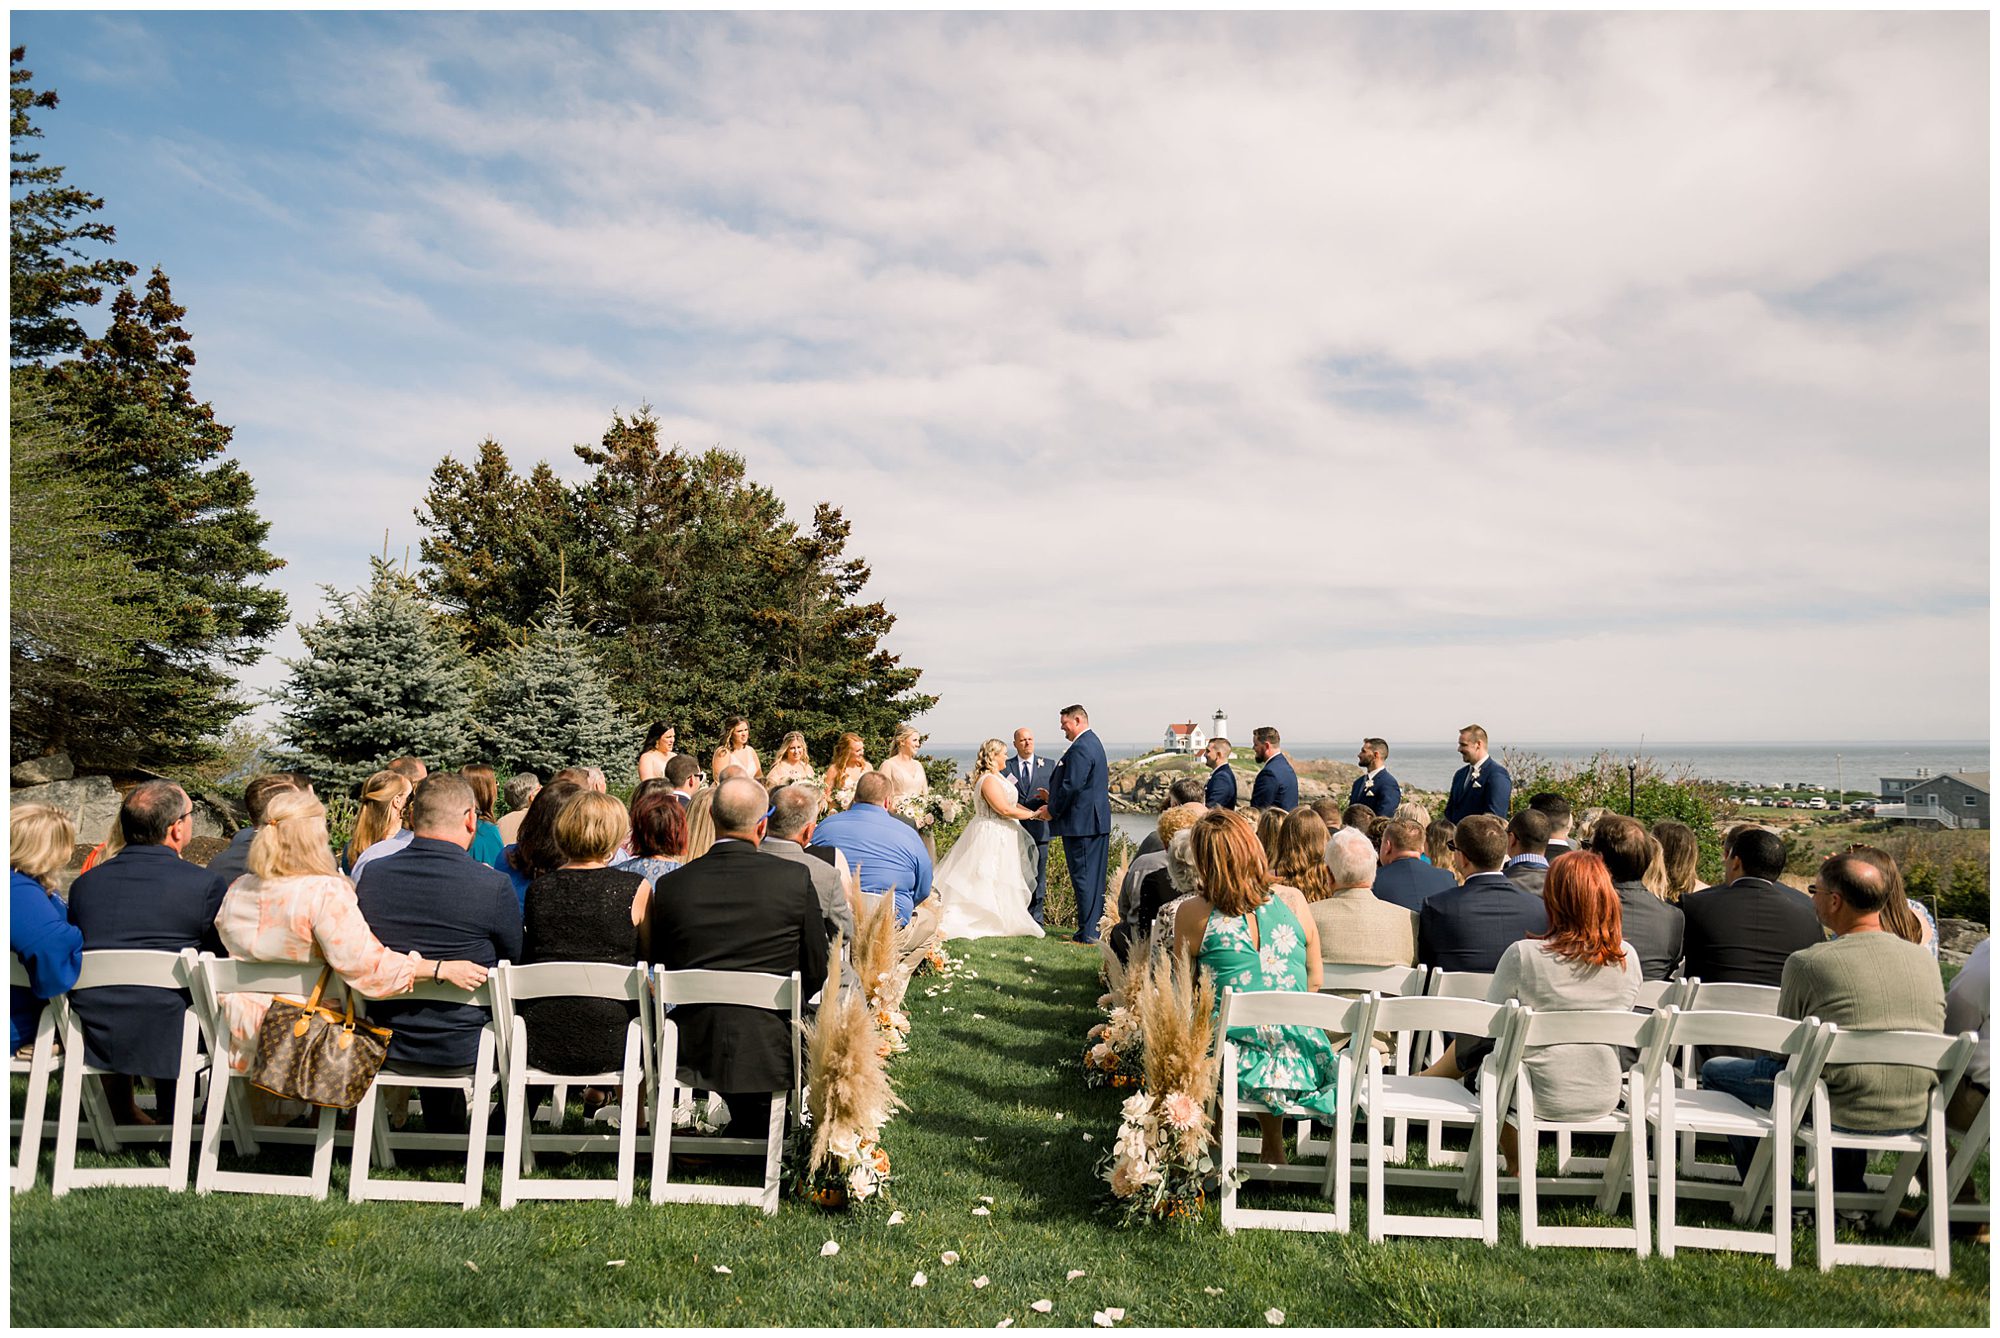 Coastal wedding ceremony at Viewpoint Hotel in York Maine.